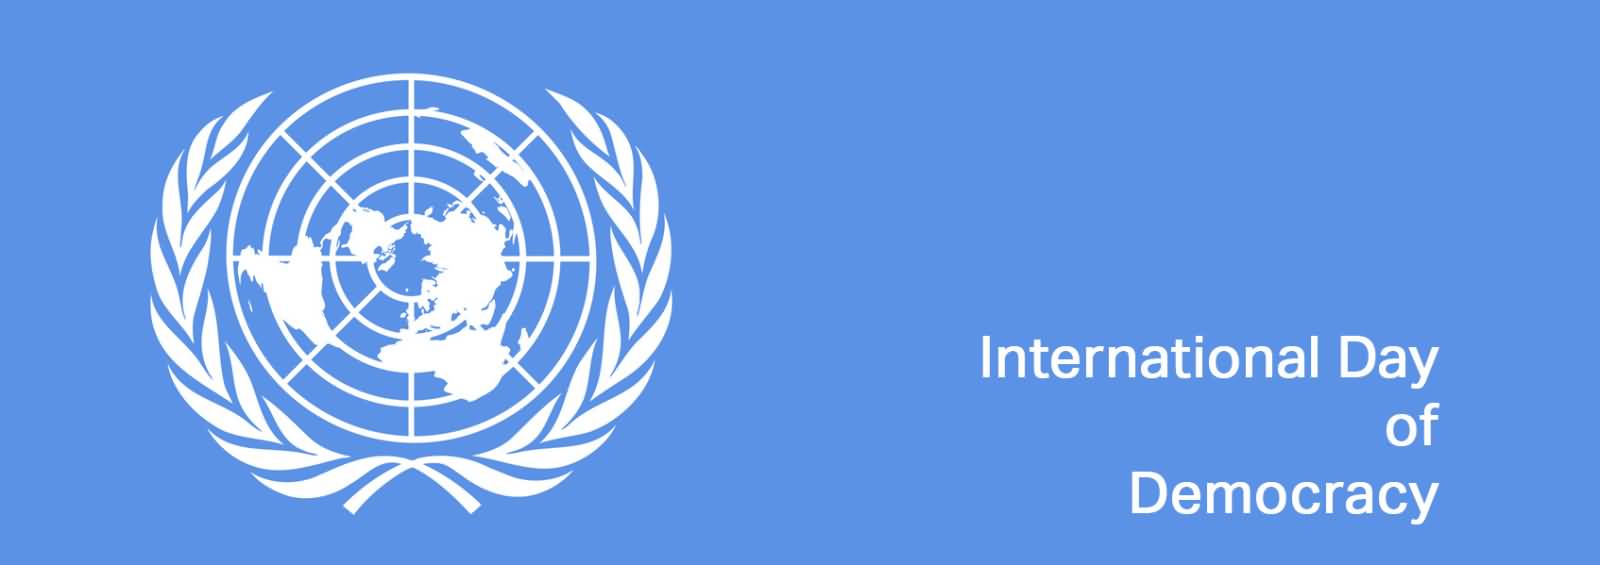 International Day of Democracy UN Logo Facebook Cover Picture